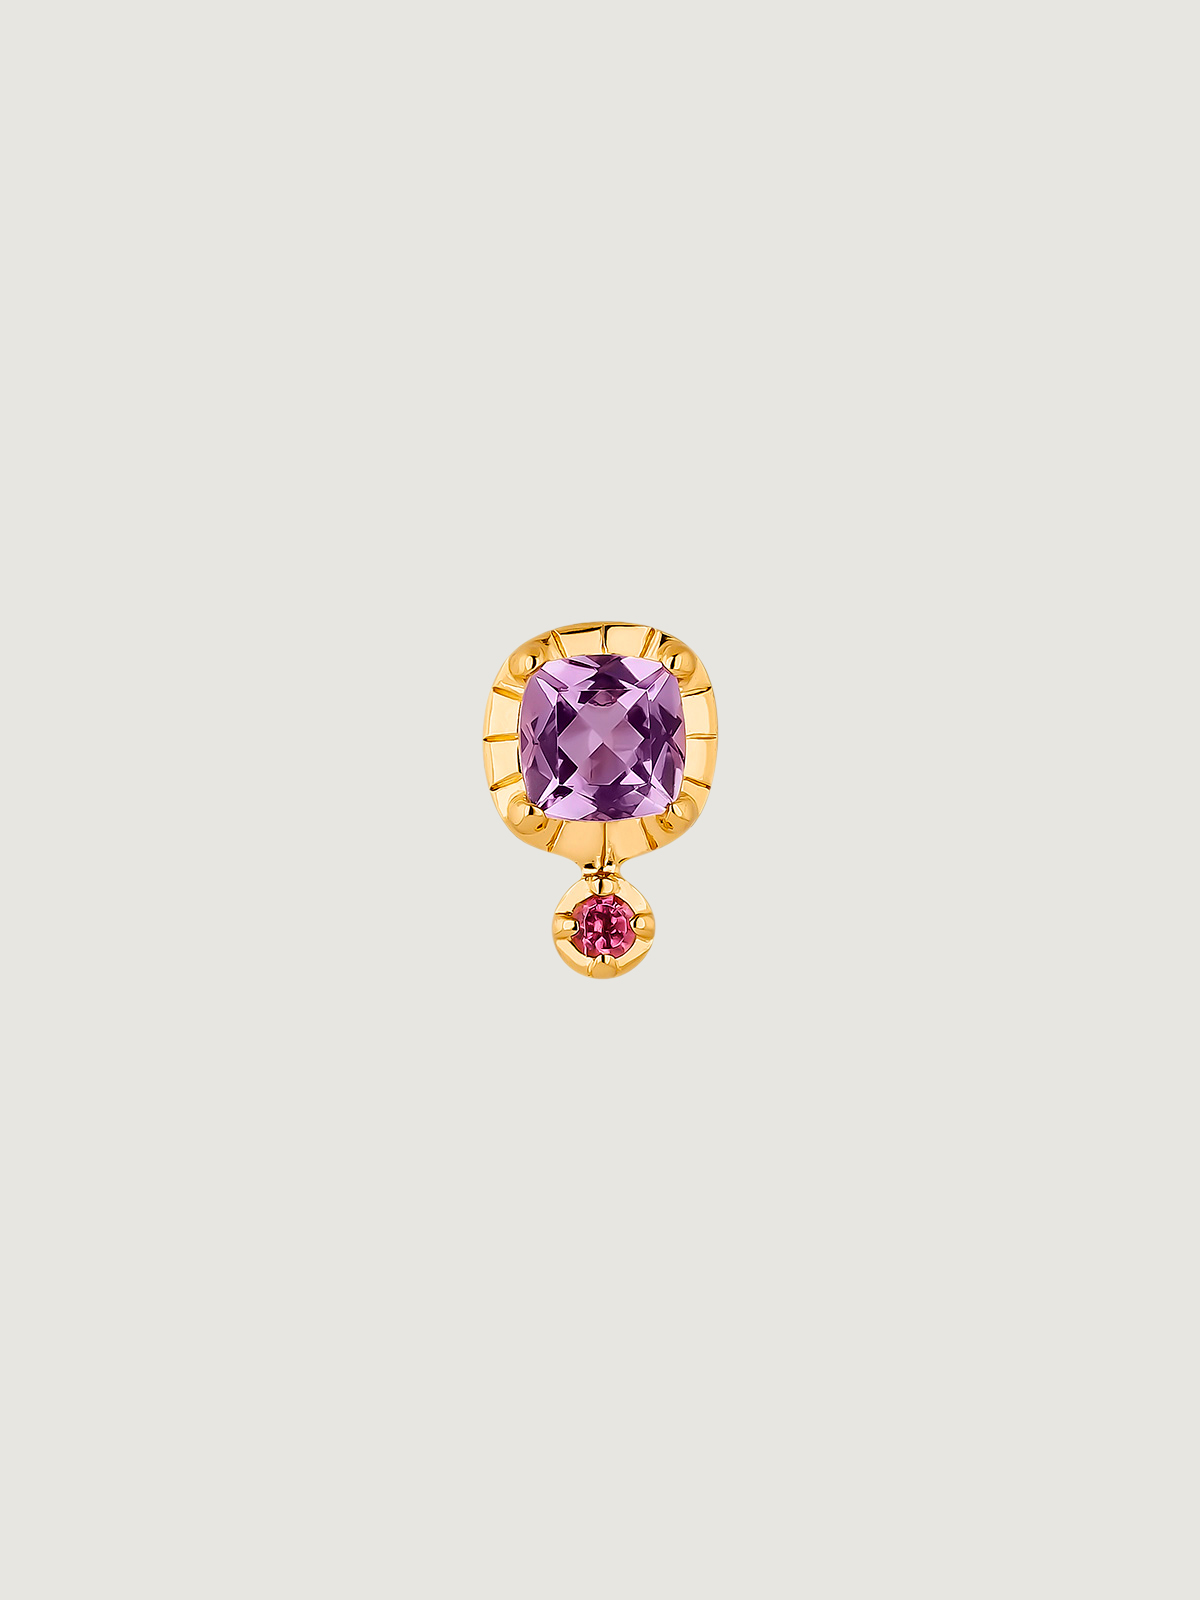 Individual earring made from 925 silver, bathed in 18K yellow gold with purple amethyst and pink rhodolite.